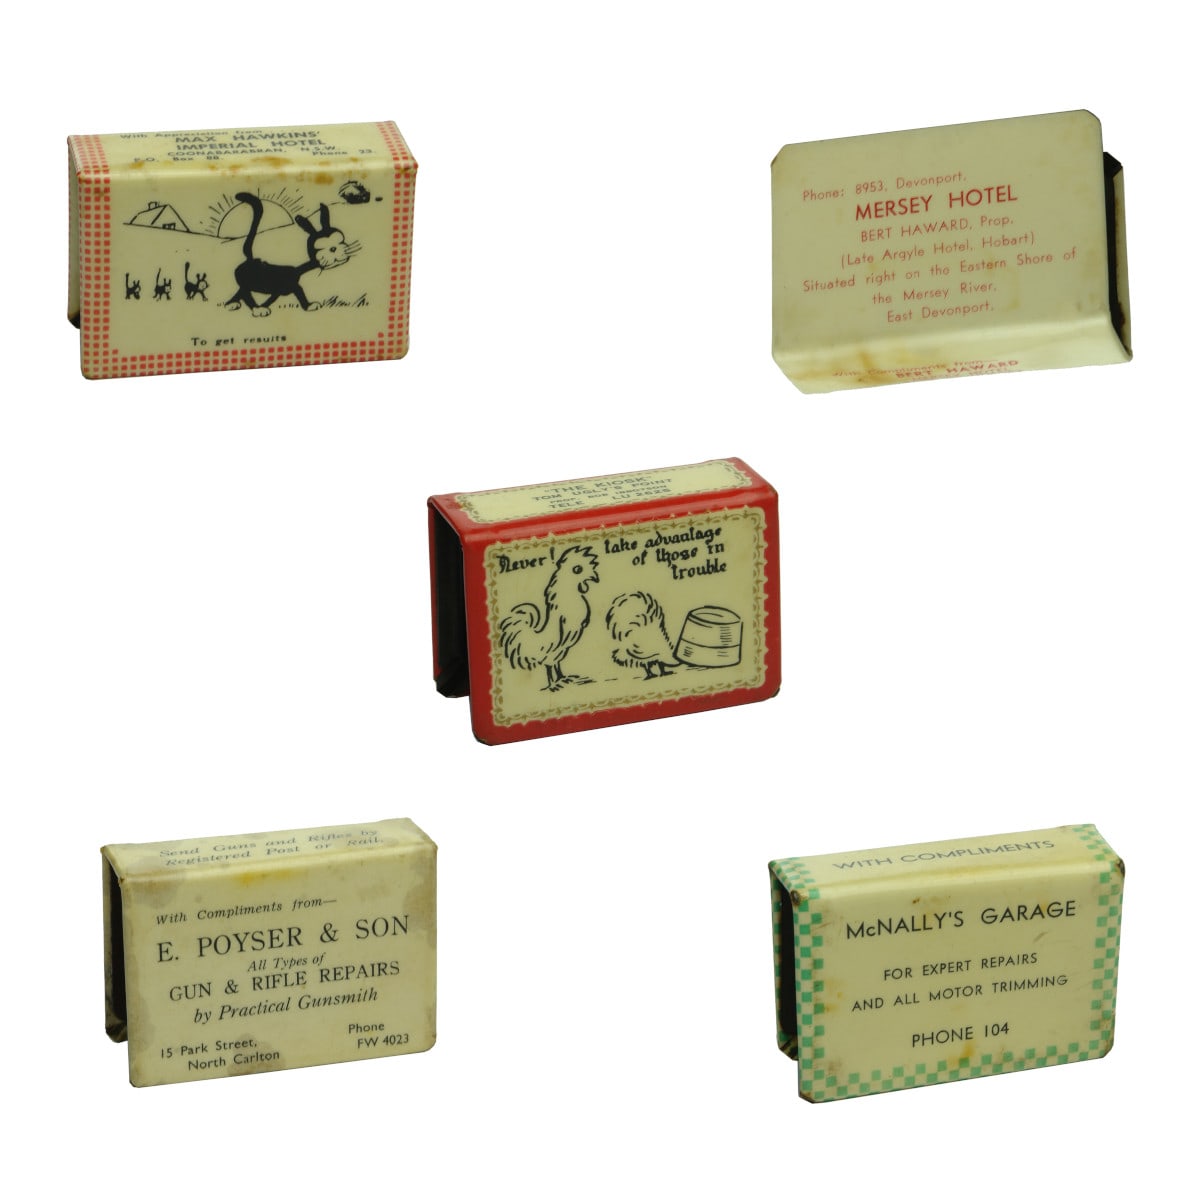 Five Advertising Novelty Matchbox Covers: Imperial Hotel, Coonabarabran; Mersey Hotel, East Devonport; The Kiosk, Tom Ugly's Point; Poyser & Son, North Carlton; McNally's Garage.